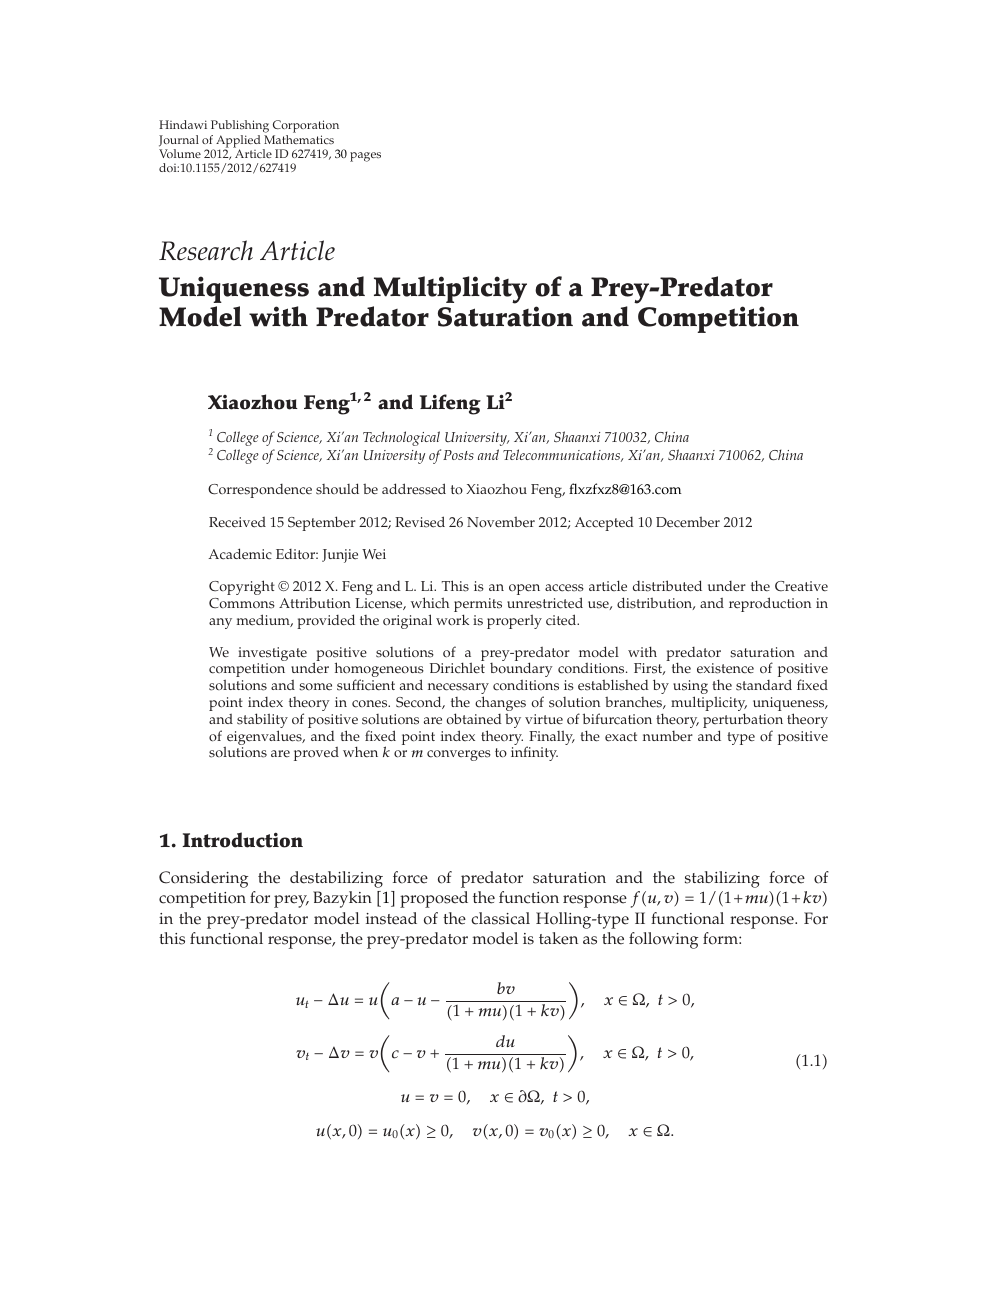 Uniqueness And Multiplicity Of A Prey Predator Model With Predator Saturation And Competition Topic Of Research Paper In Mathematics Download Scholarly Article Pdf And Read For Free On Cyberleninka Open Science Hub